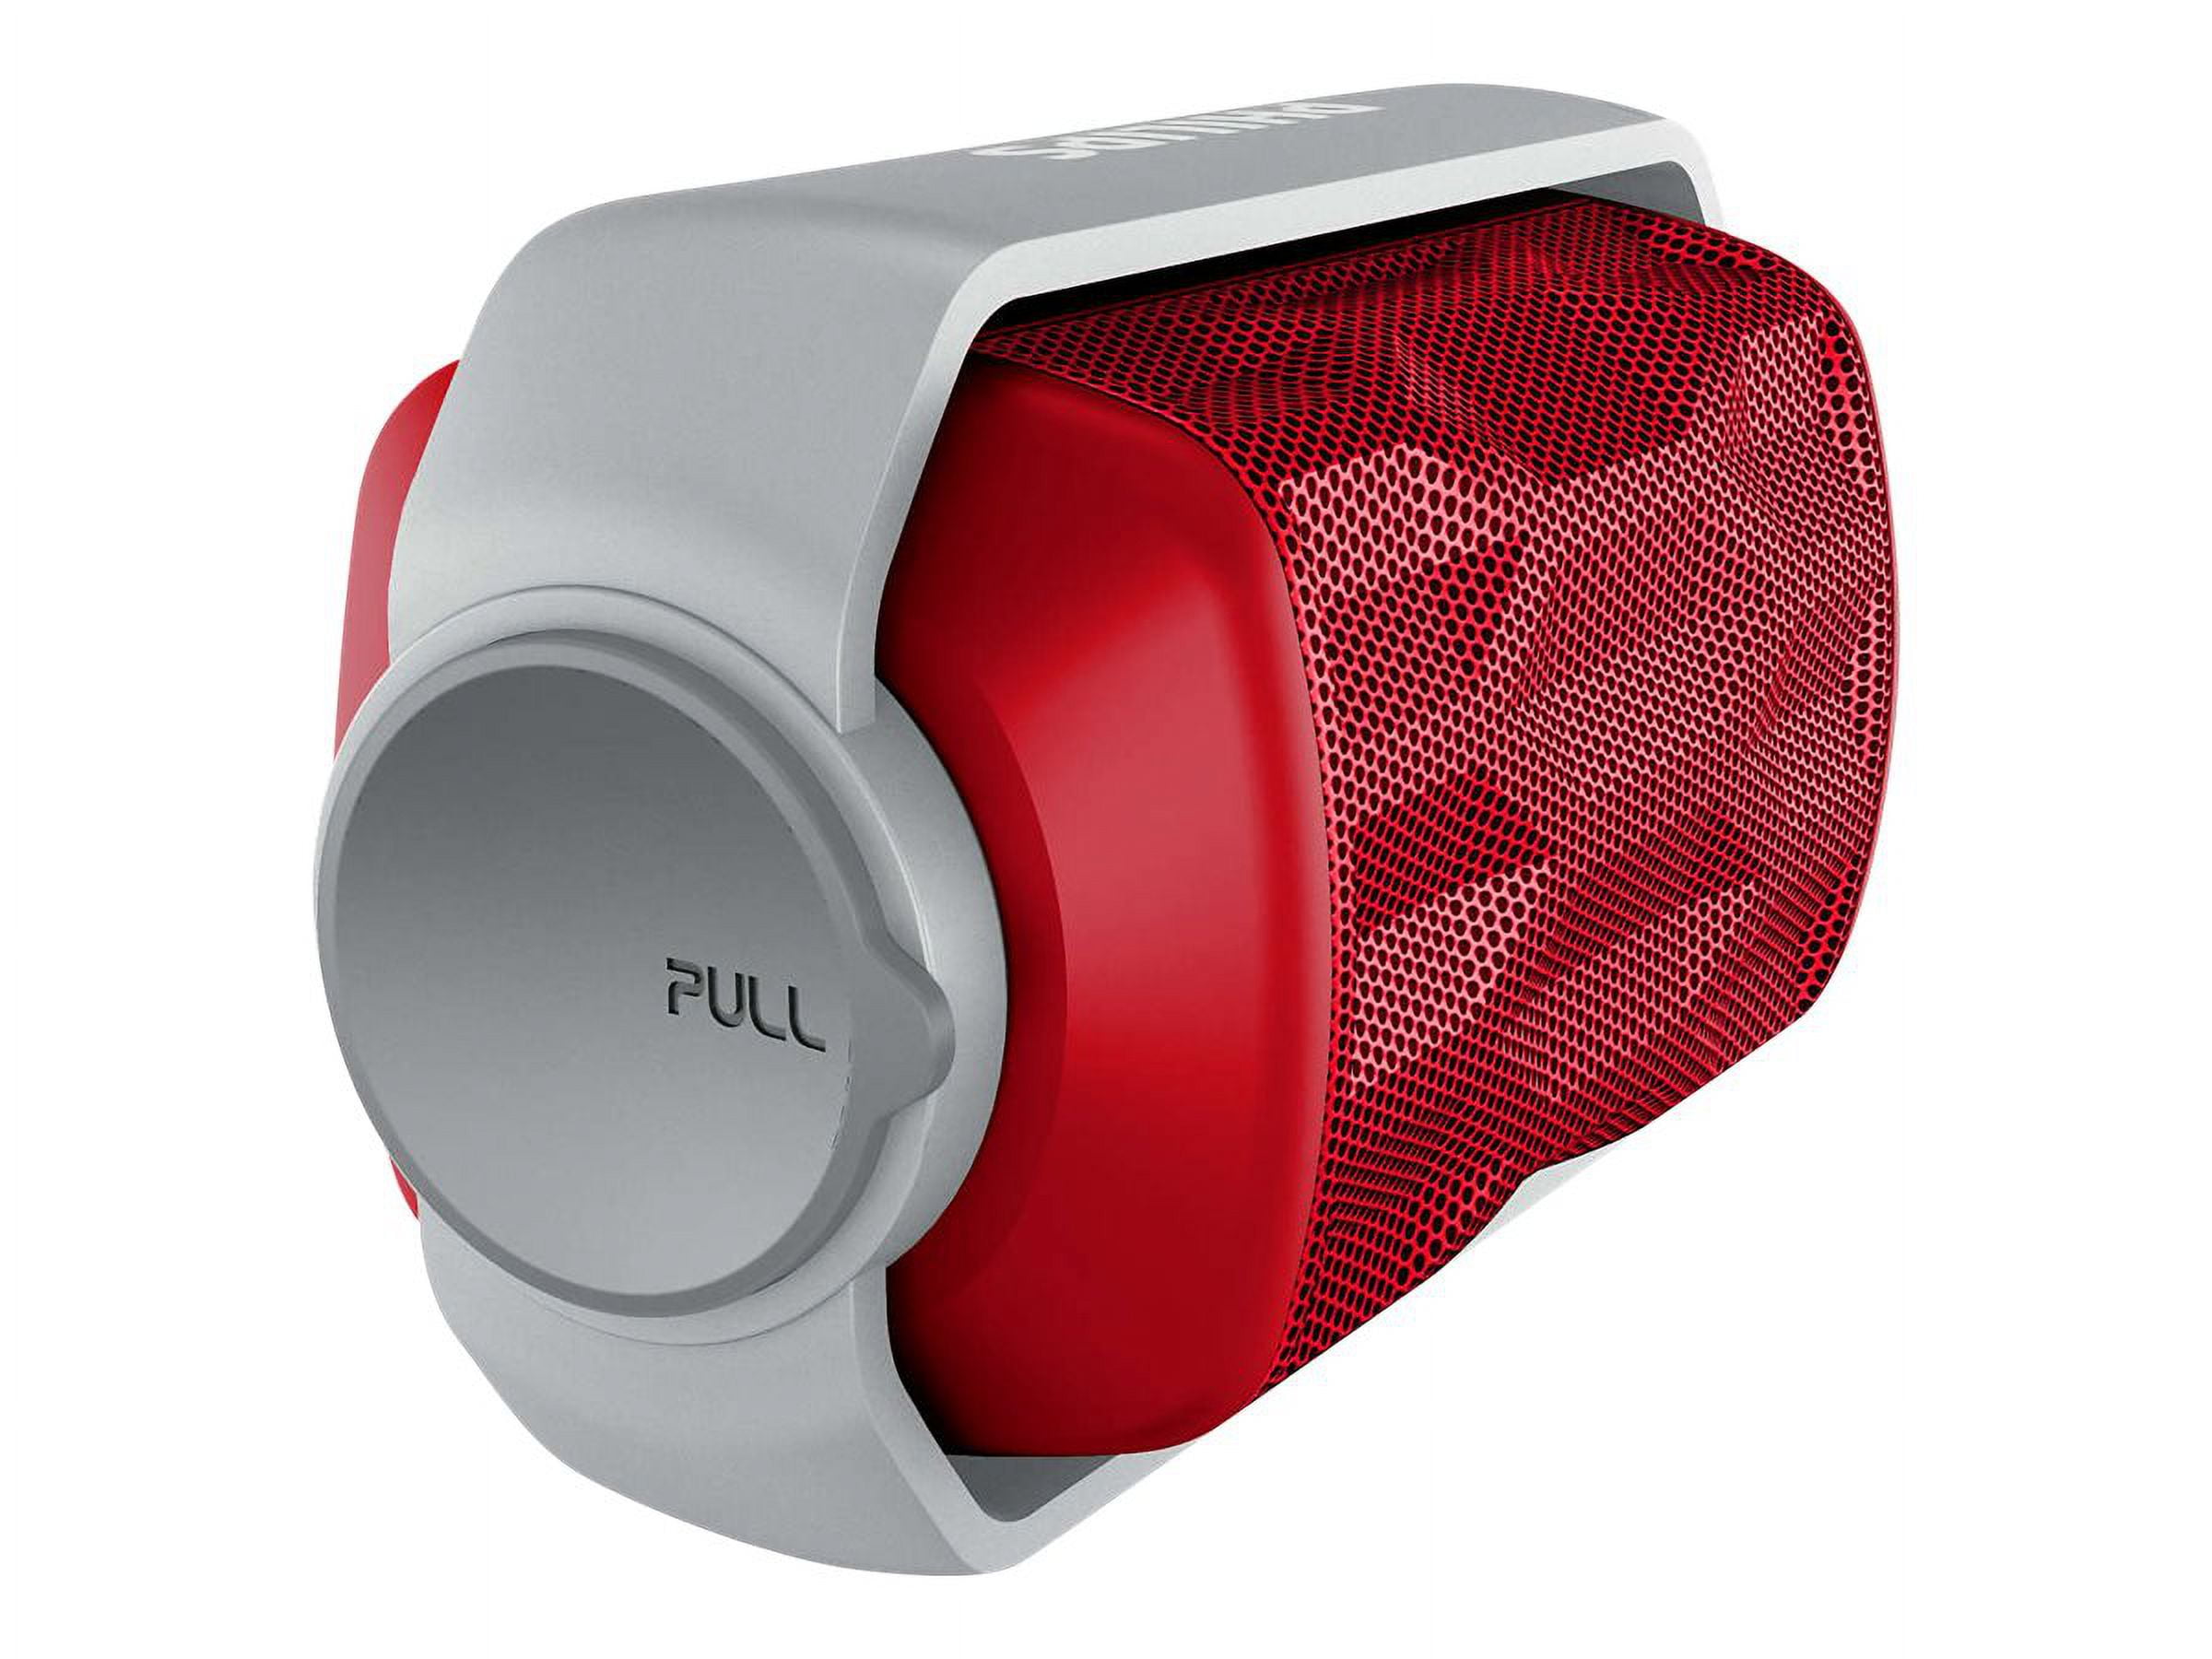 Philips BT2200B/27 Shoqbox Mini Rugged Compact Wireless Waterproof Outdoor or Shower Portable Bluetooth Speaker (Red) Float in Water and Built-In Mic for Phone Calls - Walmart.com